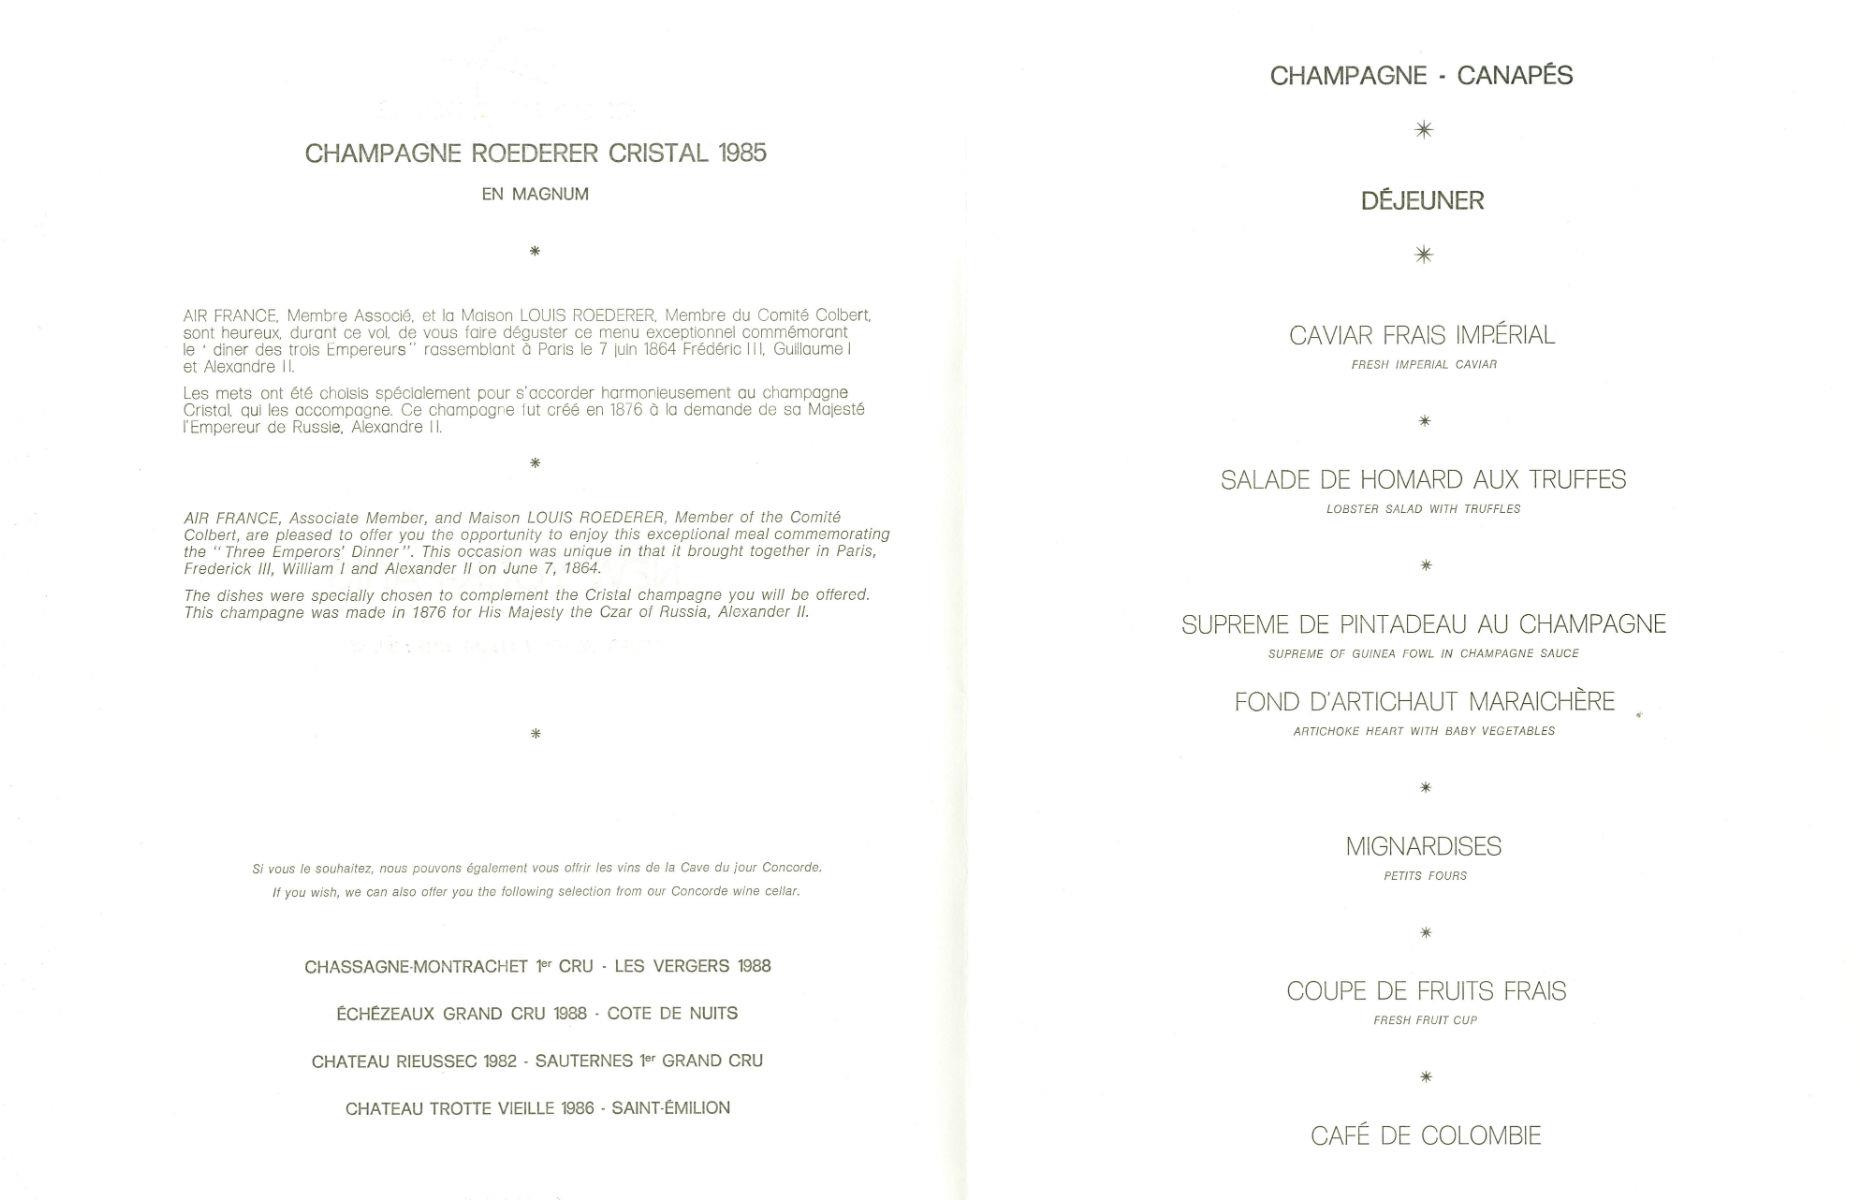 <p>Airline food in the 1990s was getting closer to what we know today. With most people sitting in economy class, portions were smaller and the meals less lavish. However, if passengers sought the luxury of the golden age of flying, all they had to do was upgrade to first. This Air France Concorde menu from 1992 shows the sort of decadent food passengers of the 1960s would have been used to: fresh caviar, lobster salad with truffles and guinea fowl in Champagne sauce.</p>